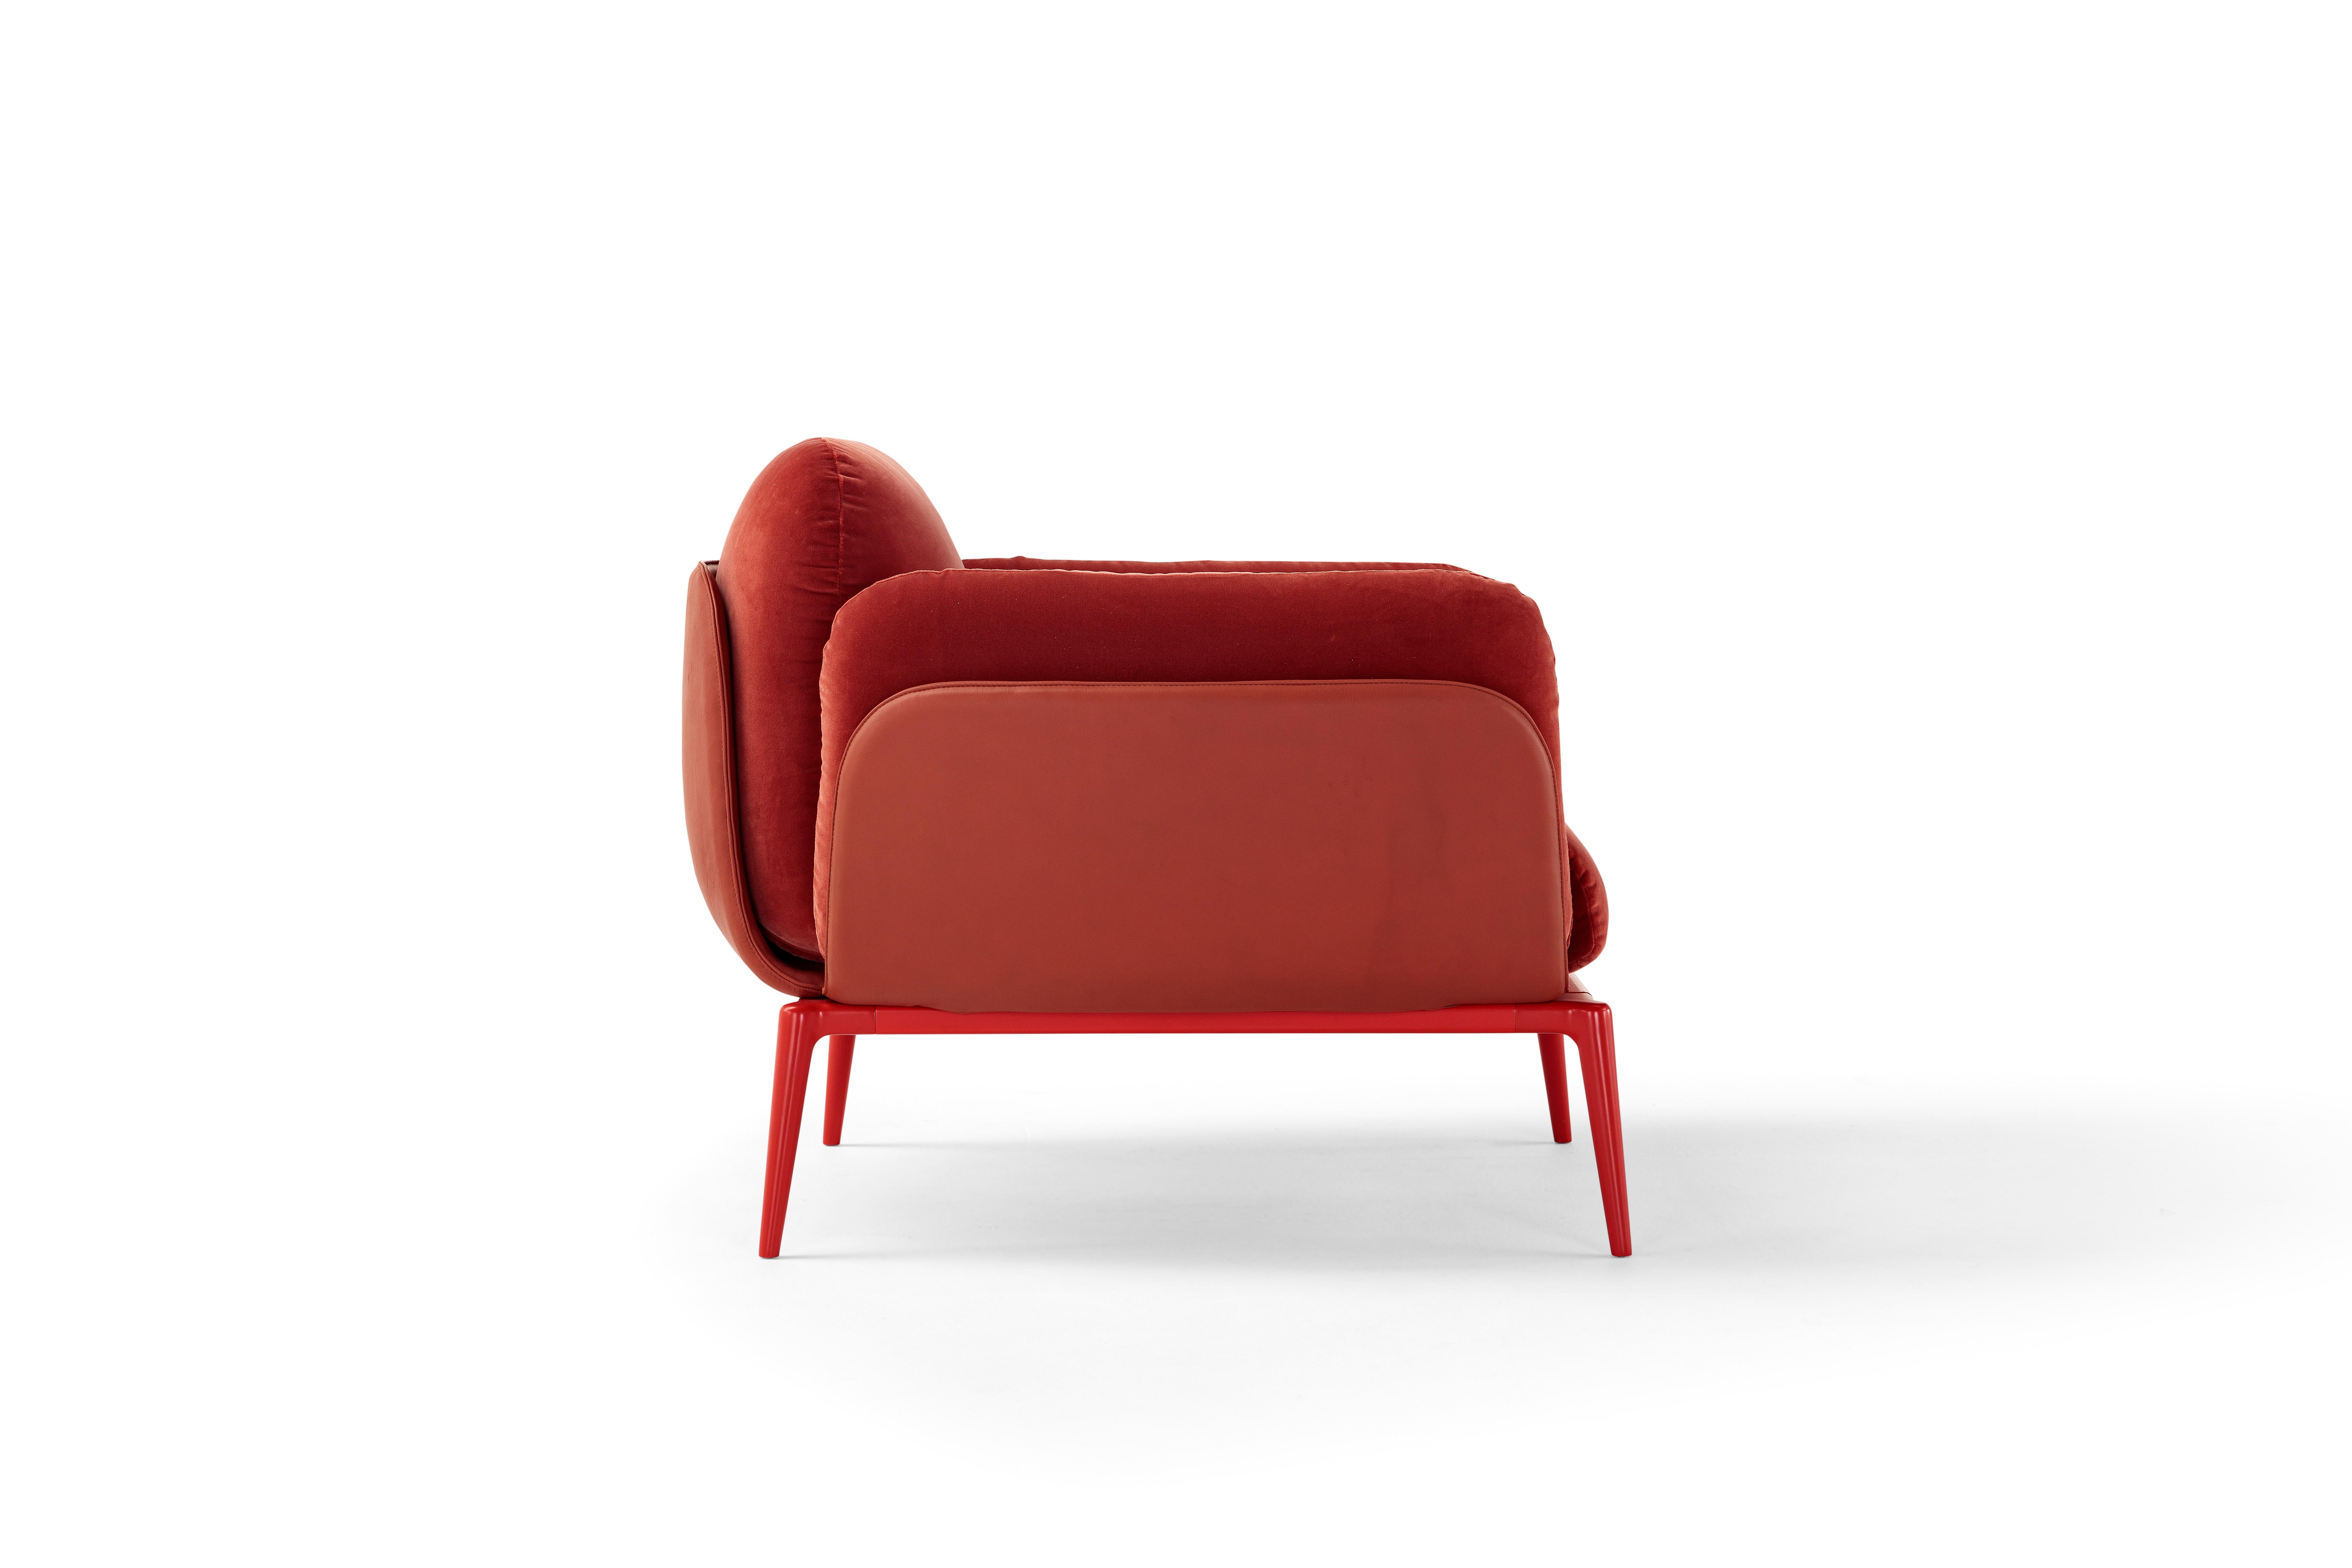 Amura Brooklyn Armchair in Red Leather and Velvet by Stefano Bigi In New Condition For Sale In GRUMO APPULA (BA), IT